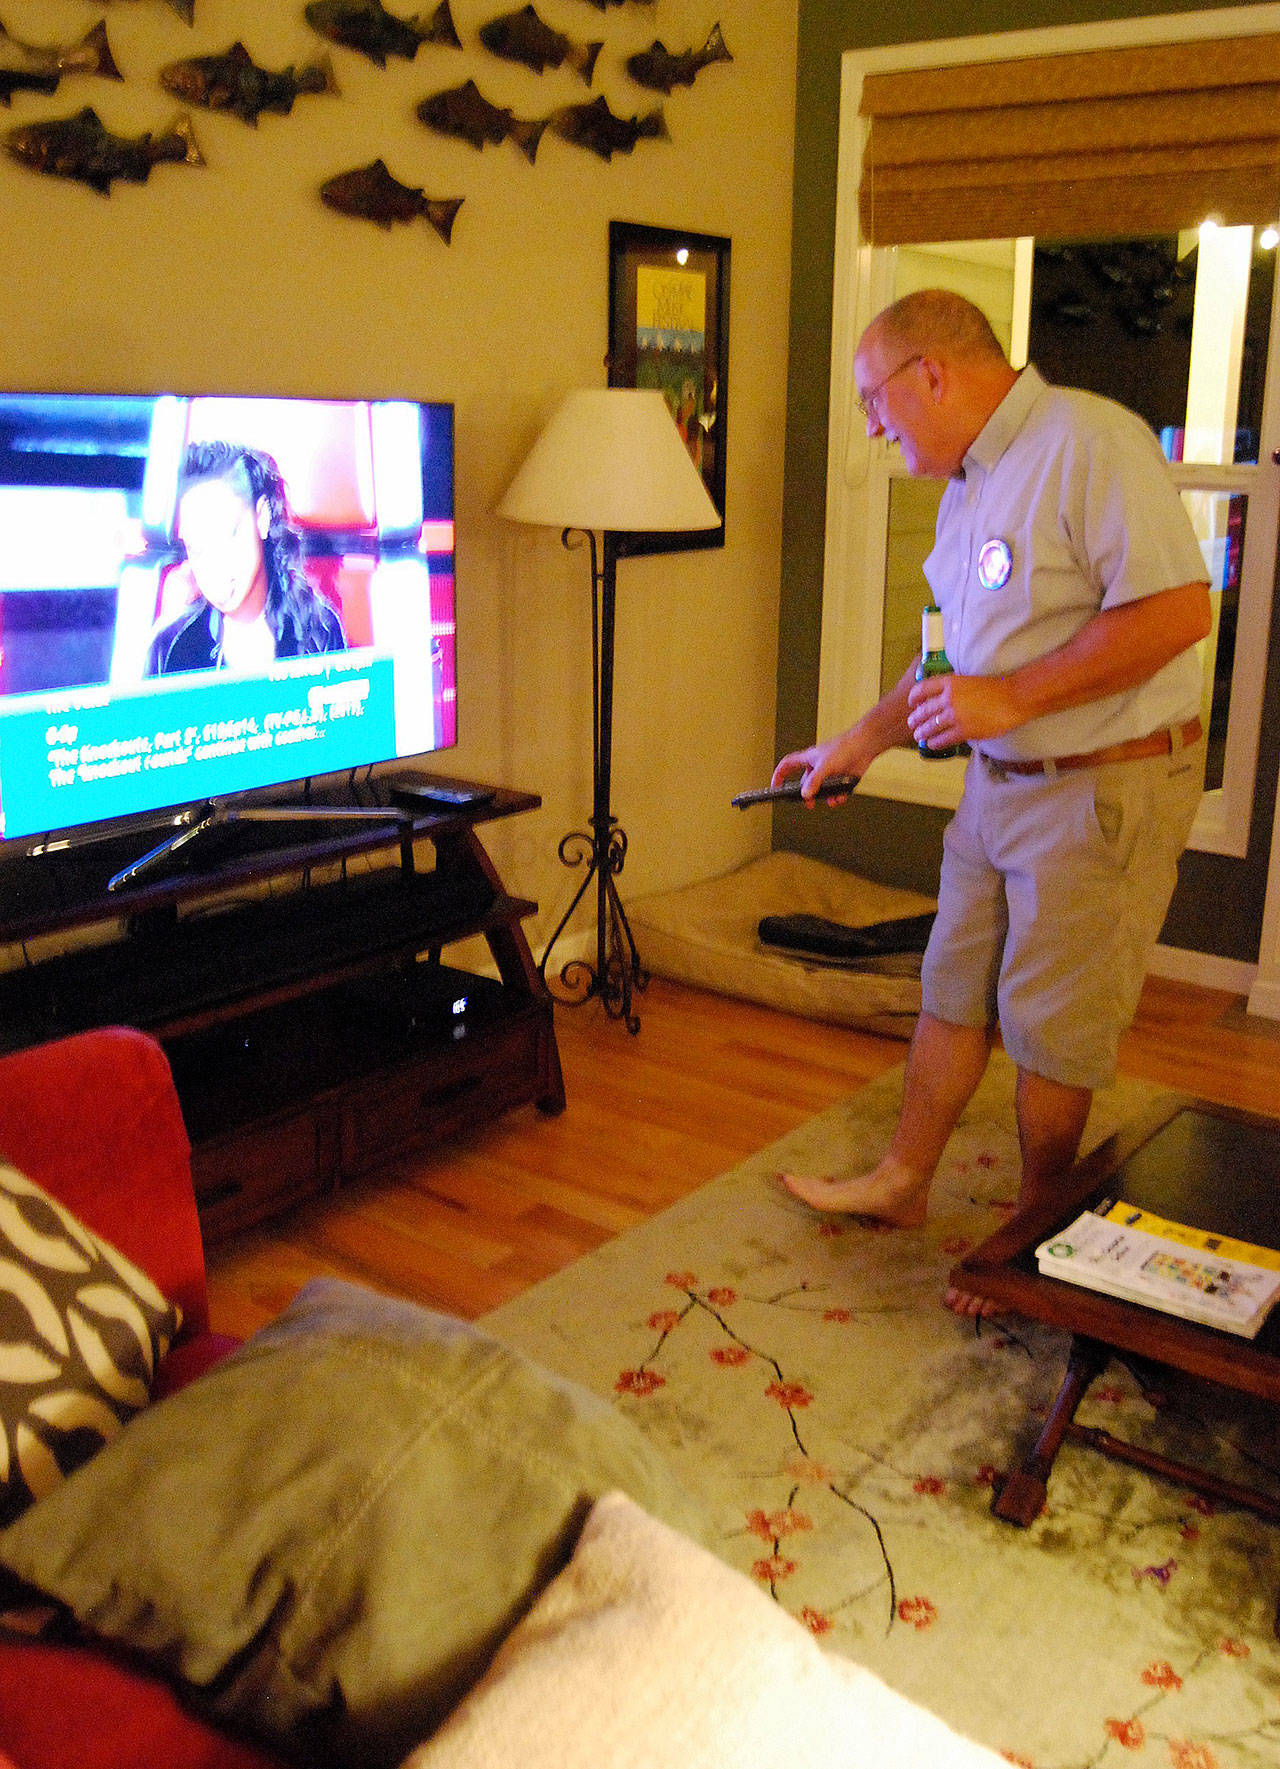 Candidate Jay Rosapepe, who a little later heard the news of his election win for the at-large seat on the Port Orchard City Council, checks the television in his McCormick Woods home for initial local election returns.                                Bob Smith | Independent